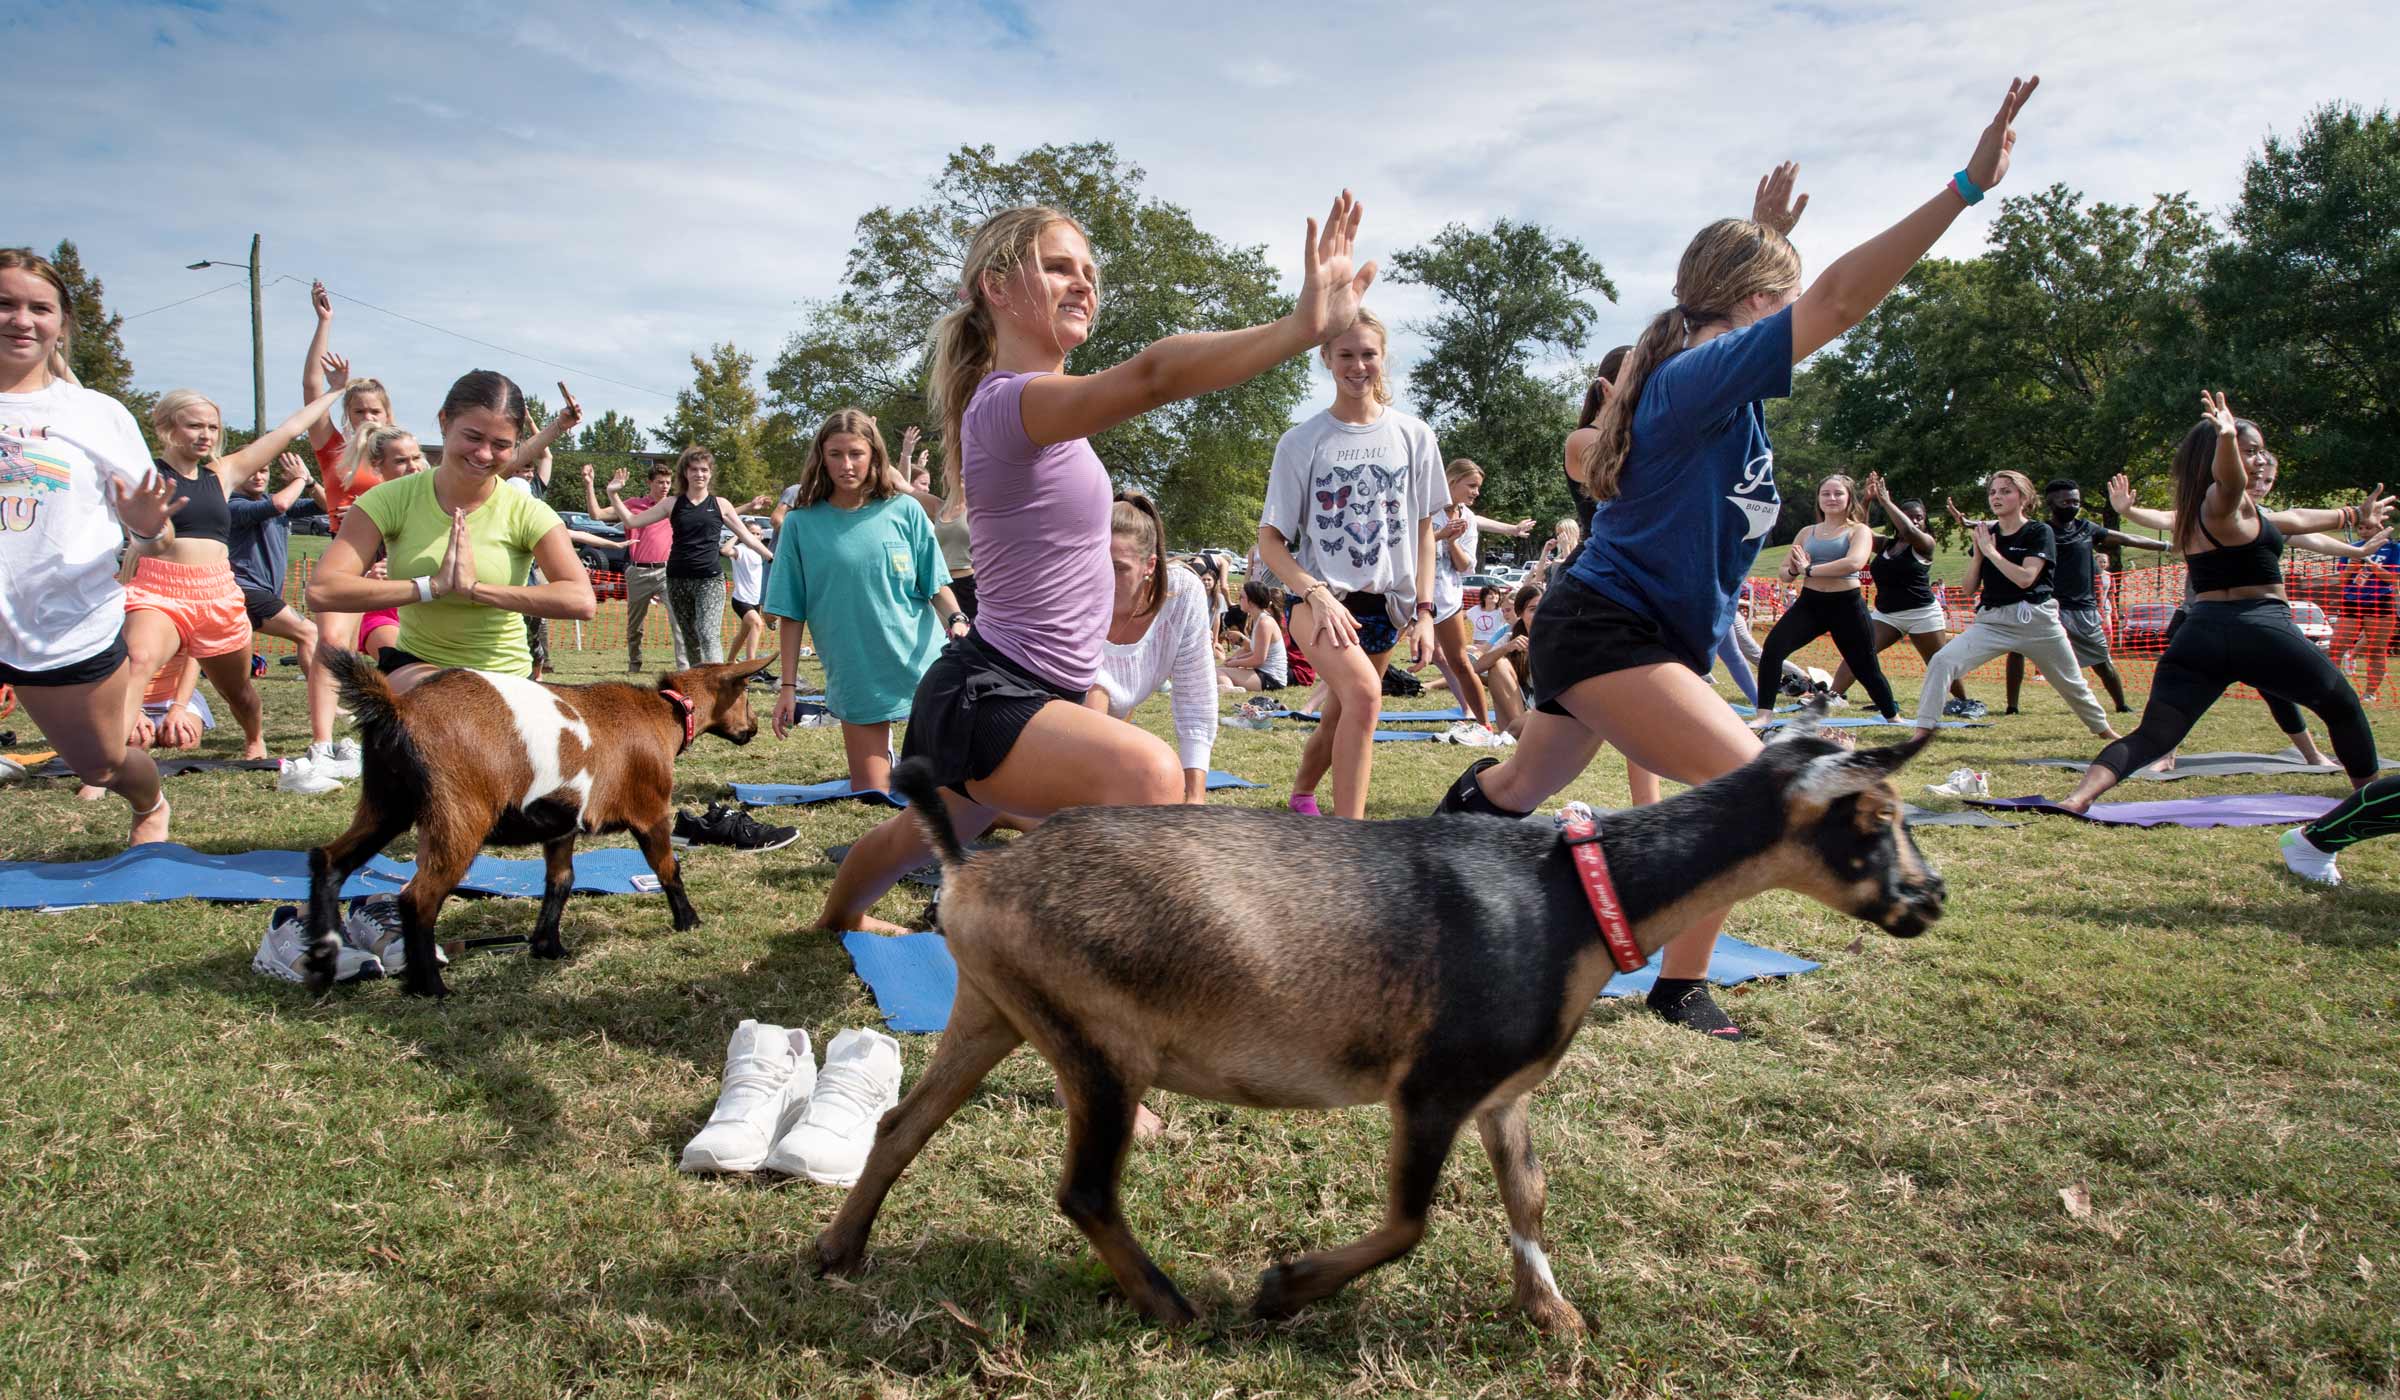 Goats pass by and through students doing yoga on matts on the grass of the Old Main Lawn.